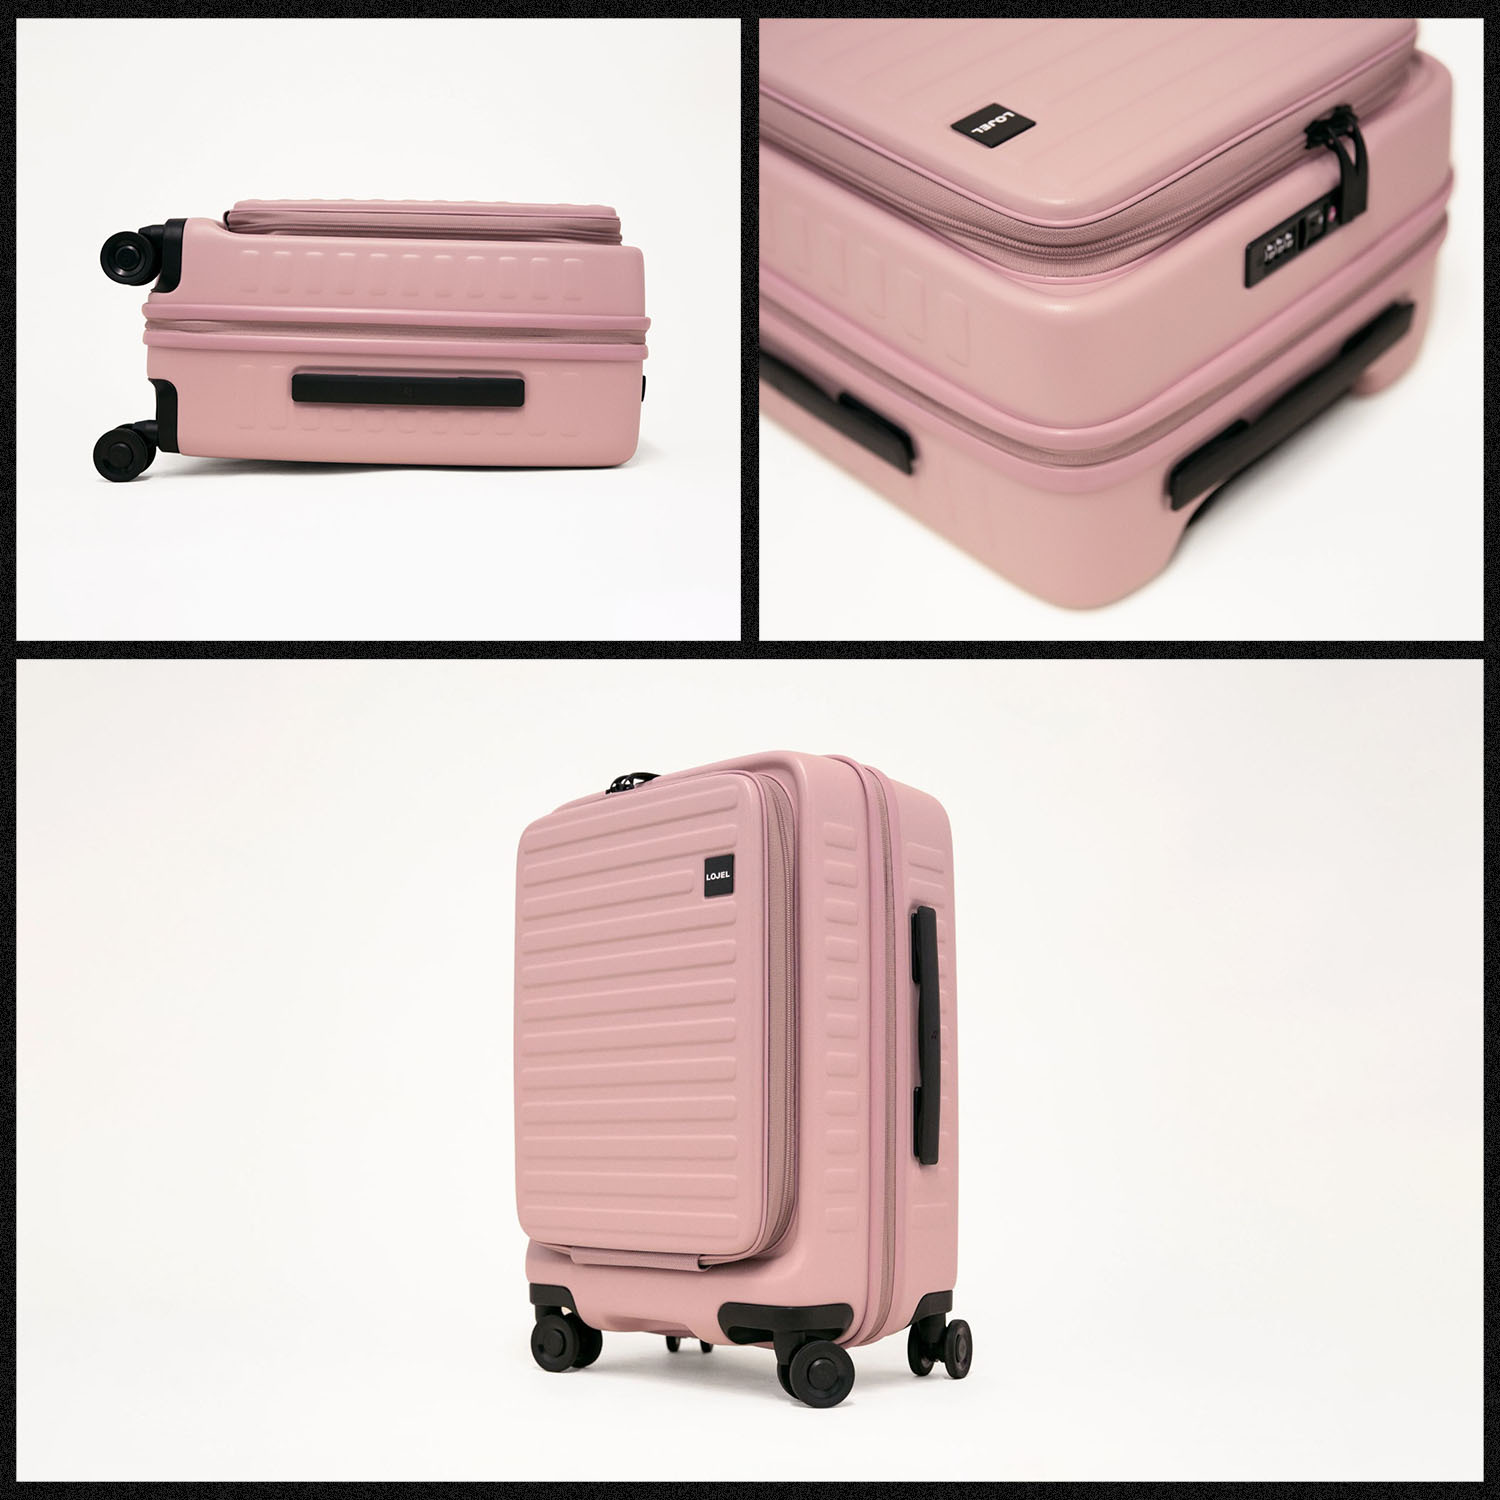 The Lojel Cubo Small Case